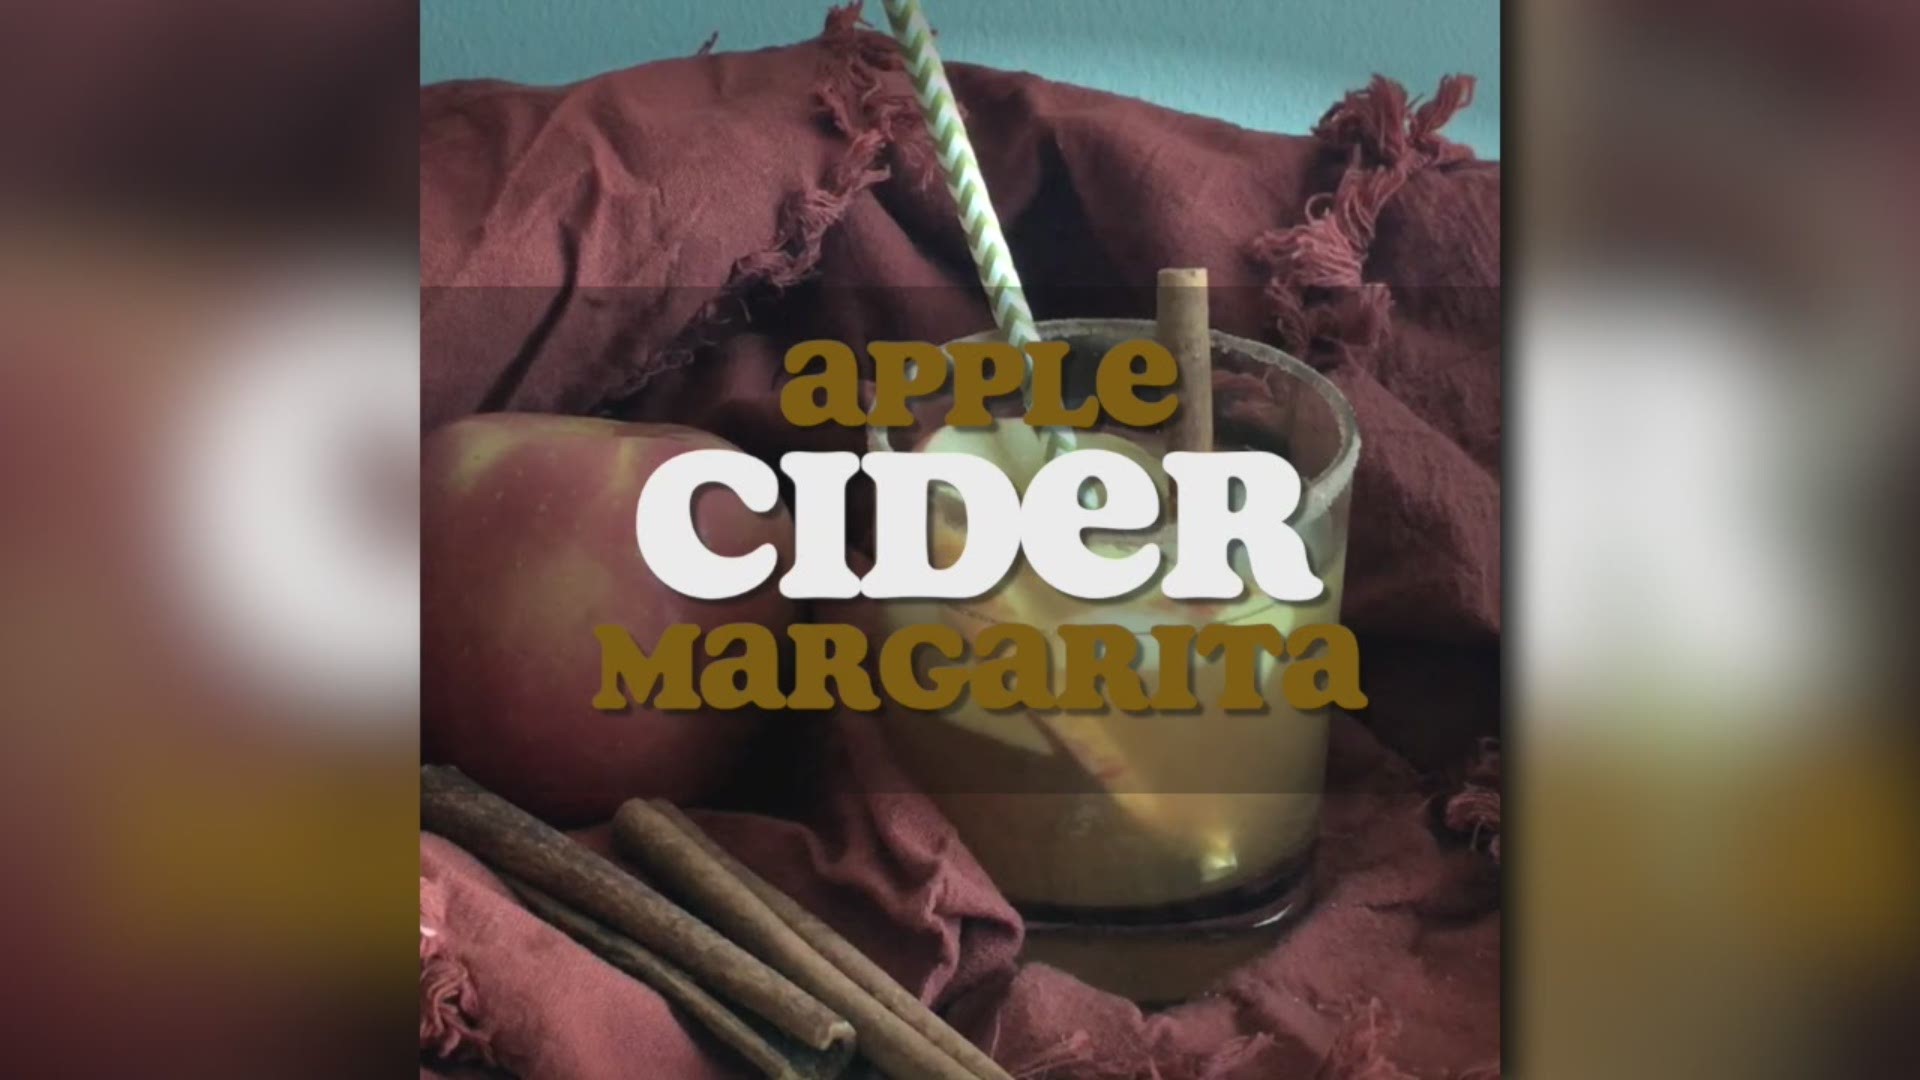 Make this easy apple cider margarita to take Thanksgiving to the next level! The Everyday Hostess/WFAA.com